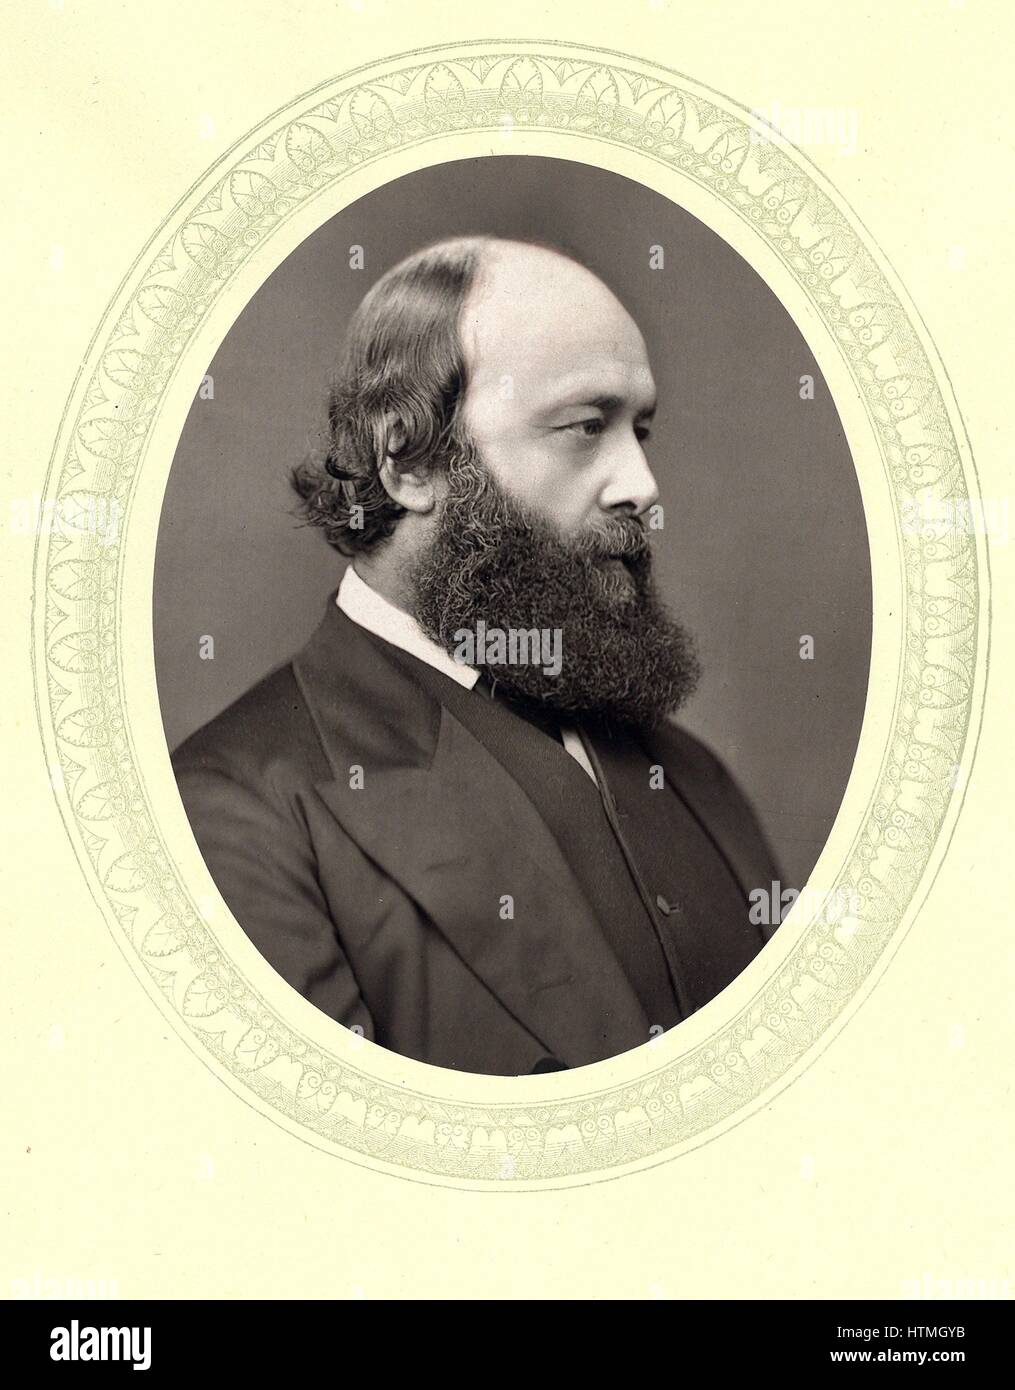 Robert Arthur Talbot Gascoyne Cecil, 3rd Marquis of Salisbury (1830-1903) British Conservative statesman. Prime Minister 1885, 1886, 1895-1902, at the time he was Secretary of State for India. From 'Men of Mark', London, 1877. Stock Photo